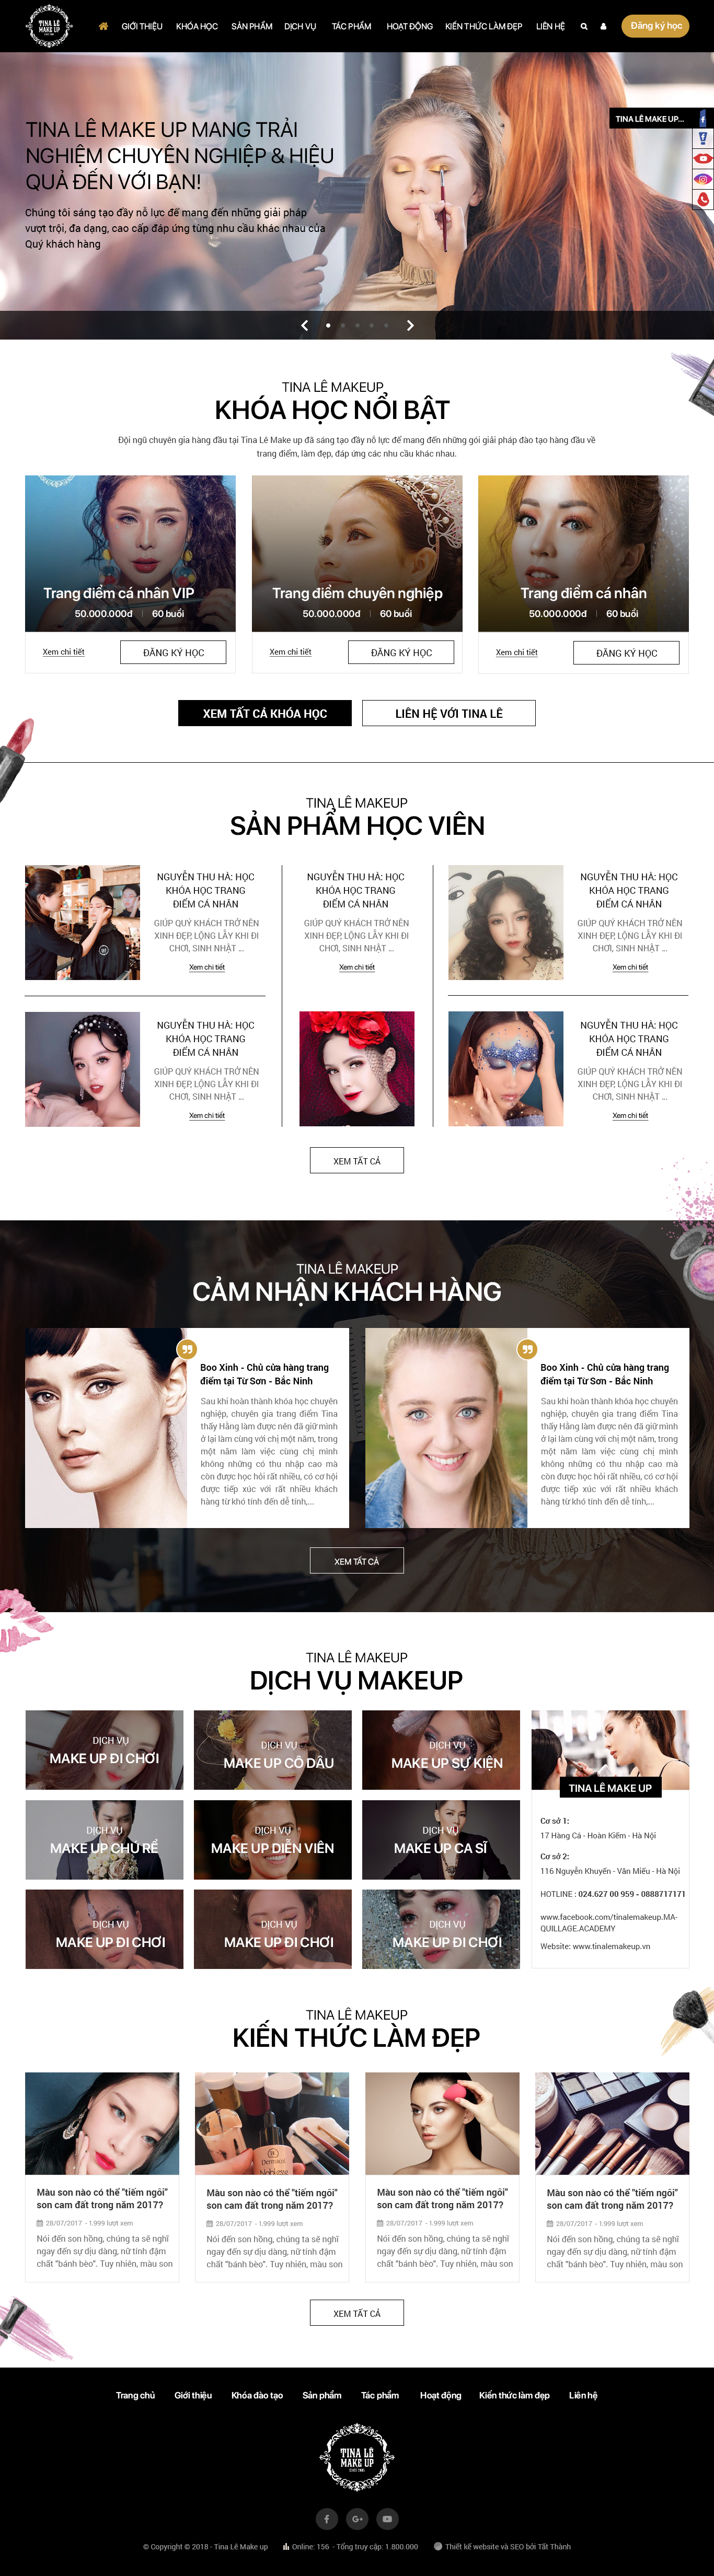 Giao diện website dịch vụ Tinalemakeup.vn